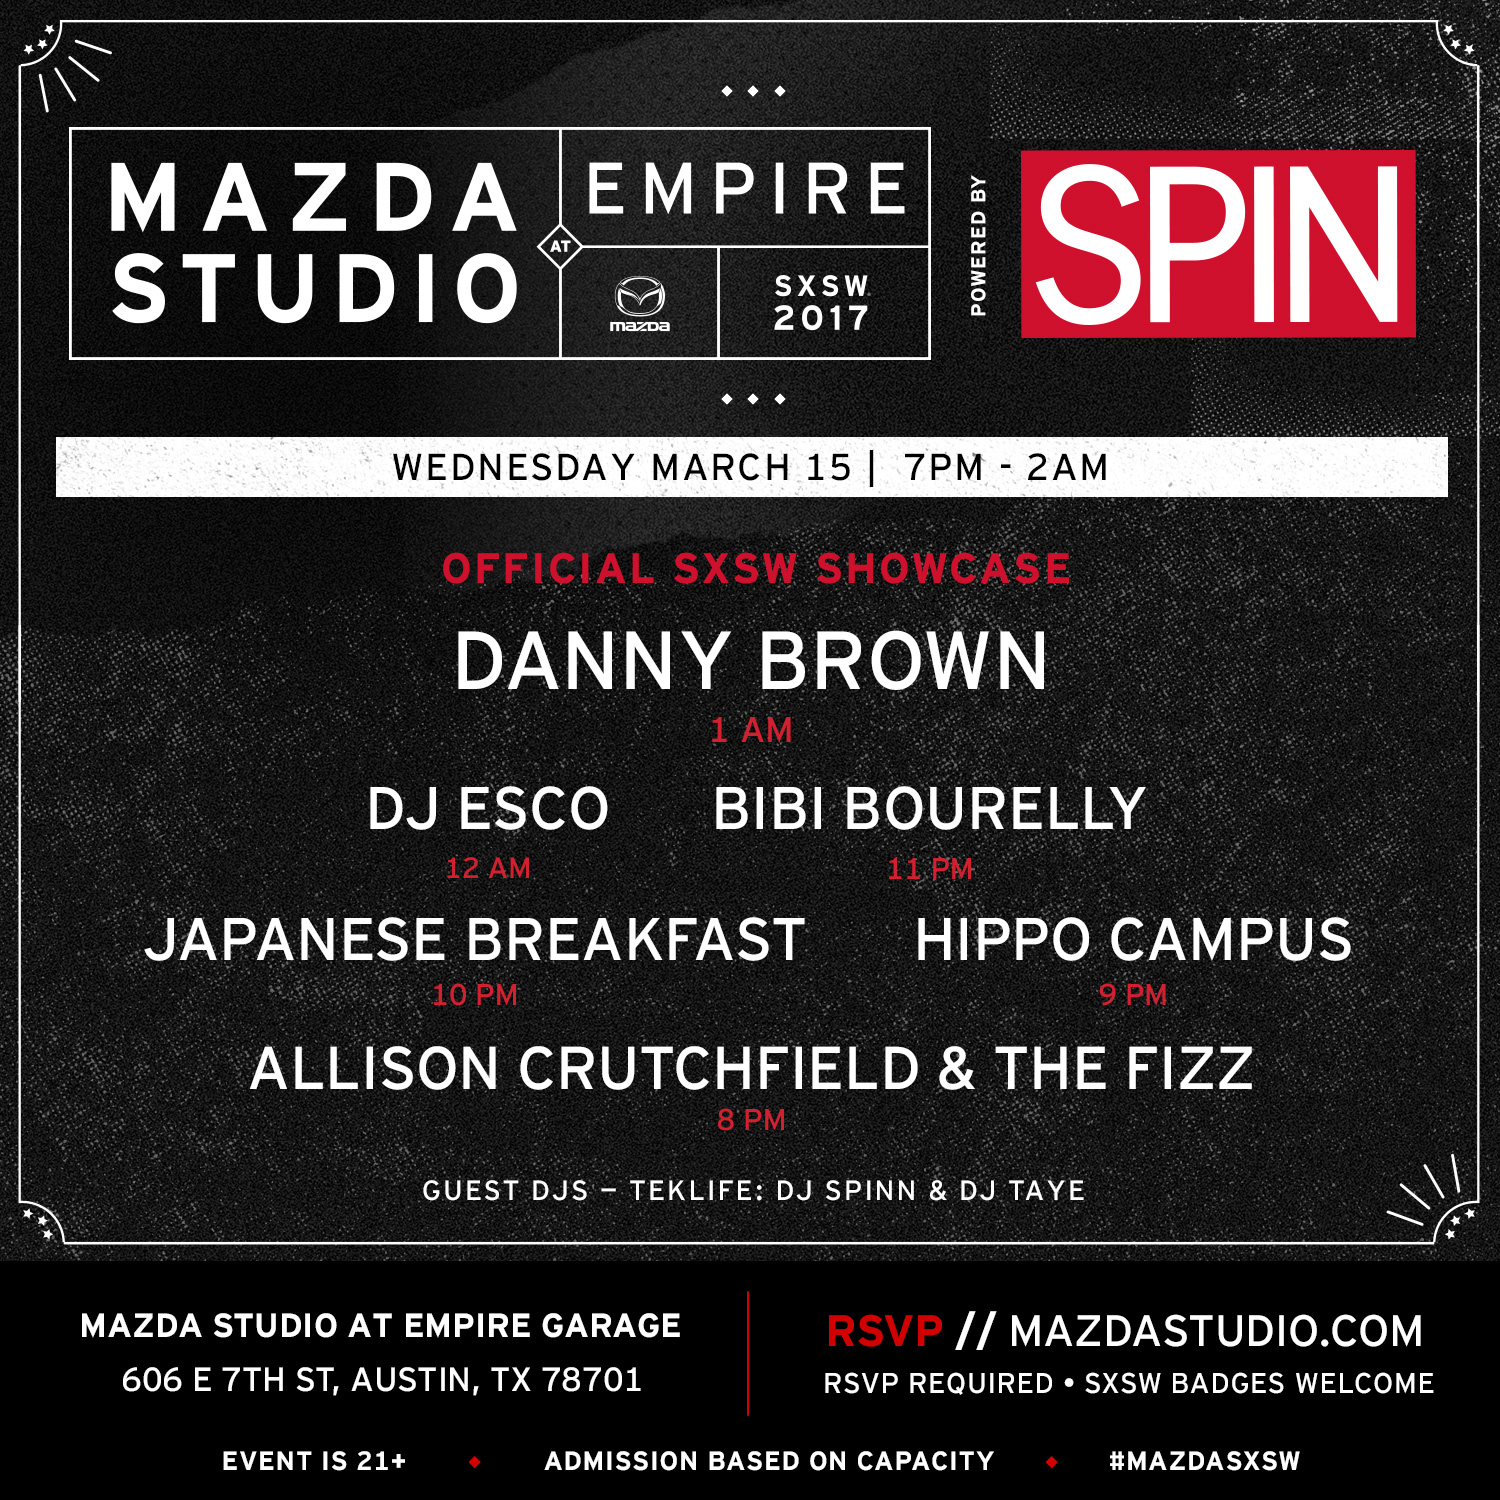 SPIN SXSW 2017 Showcases at Mazda Studio at Empire: Mastodon, Danny Brown, Lil Yachty, and More